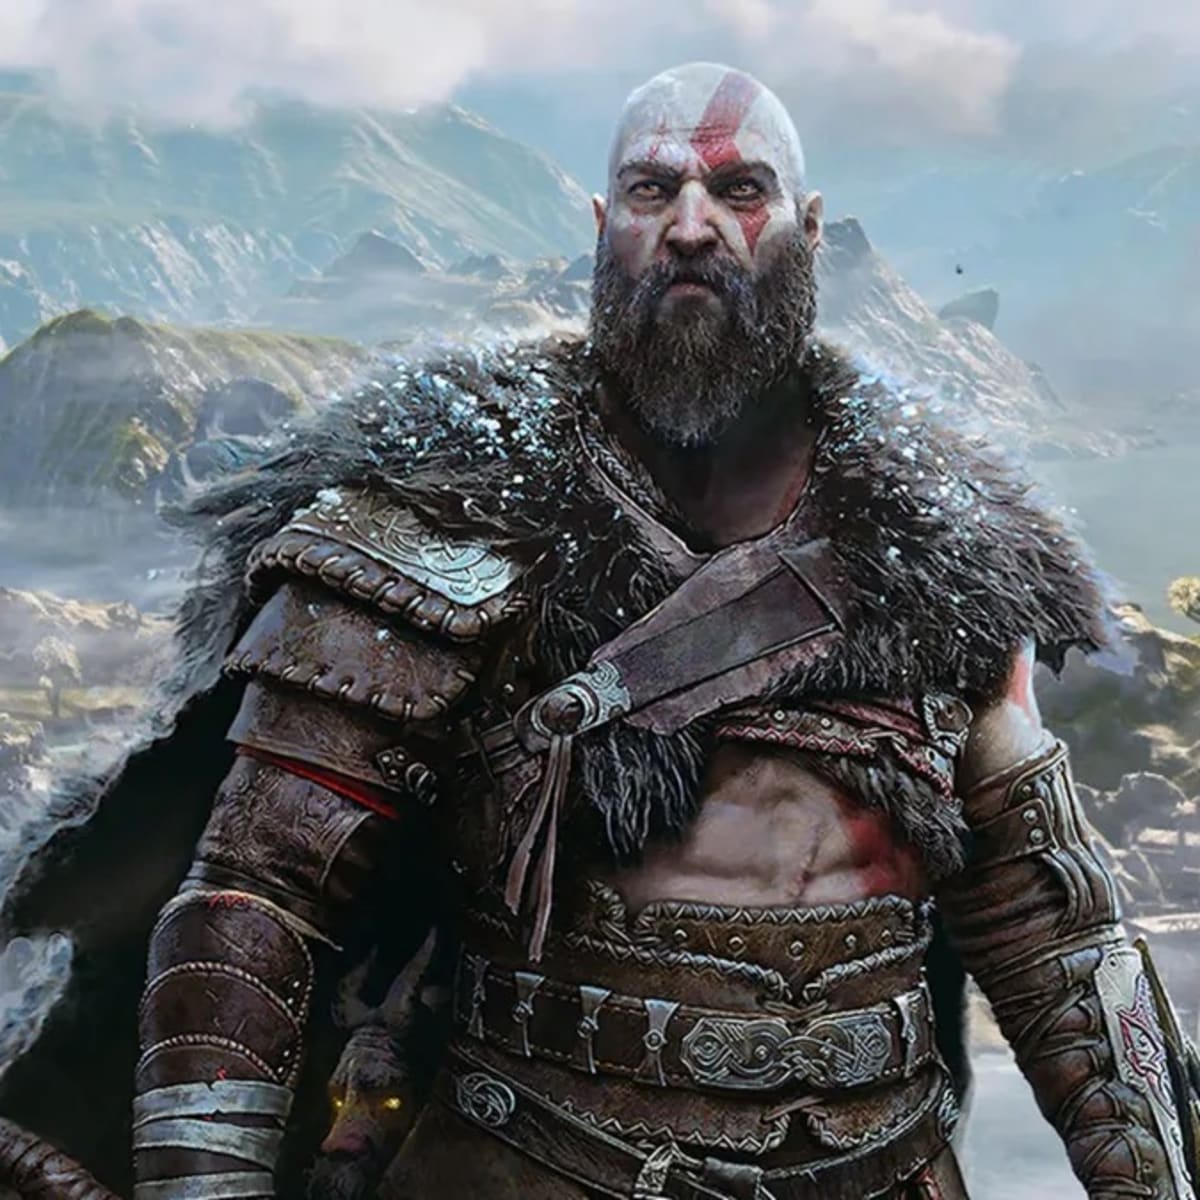 God of War preview  What we learnt from playing the opening hours of  Kratos' return